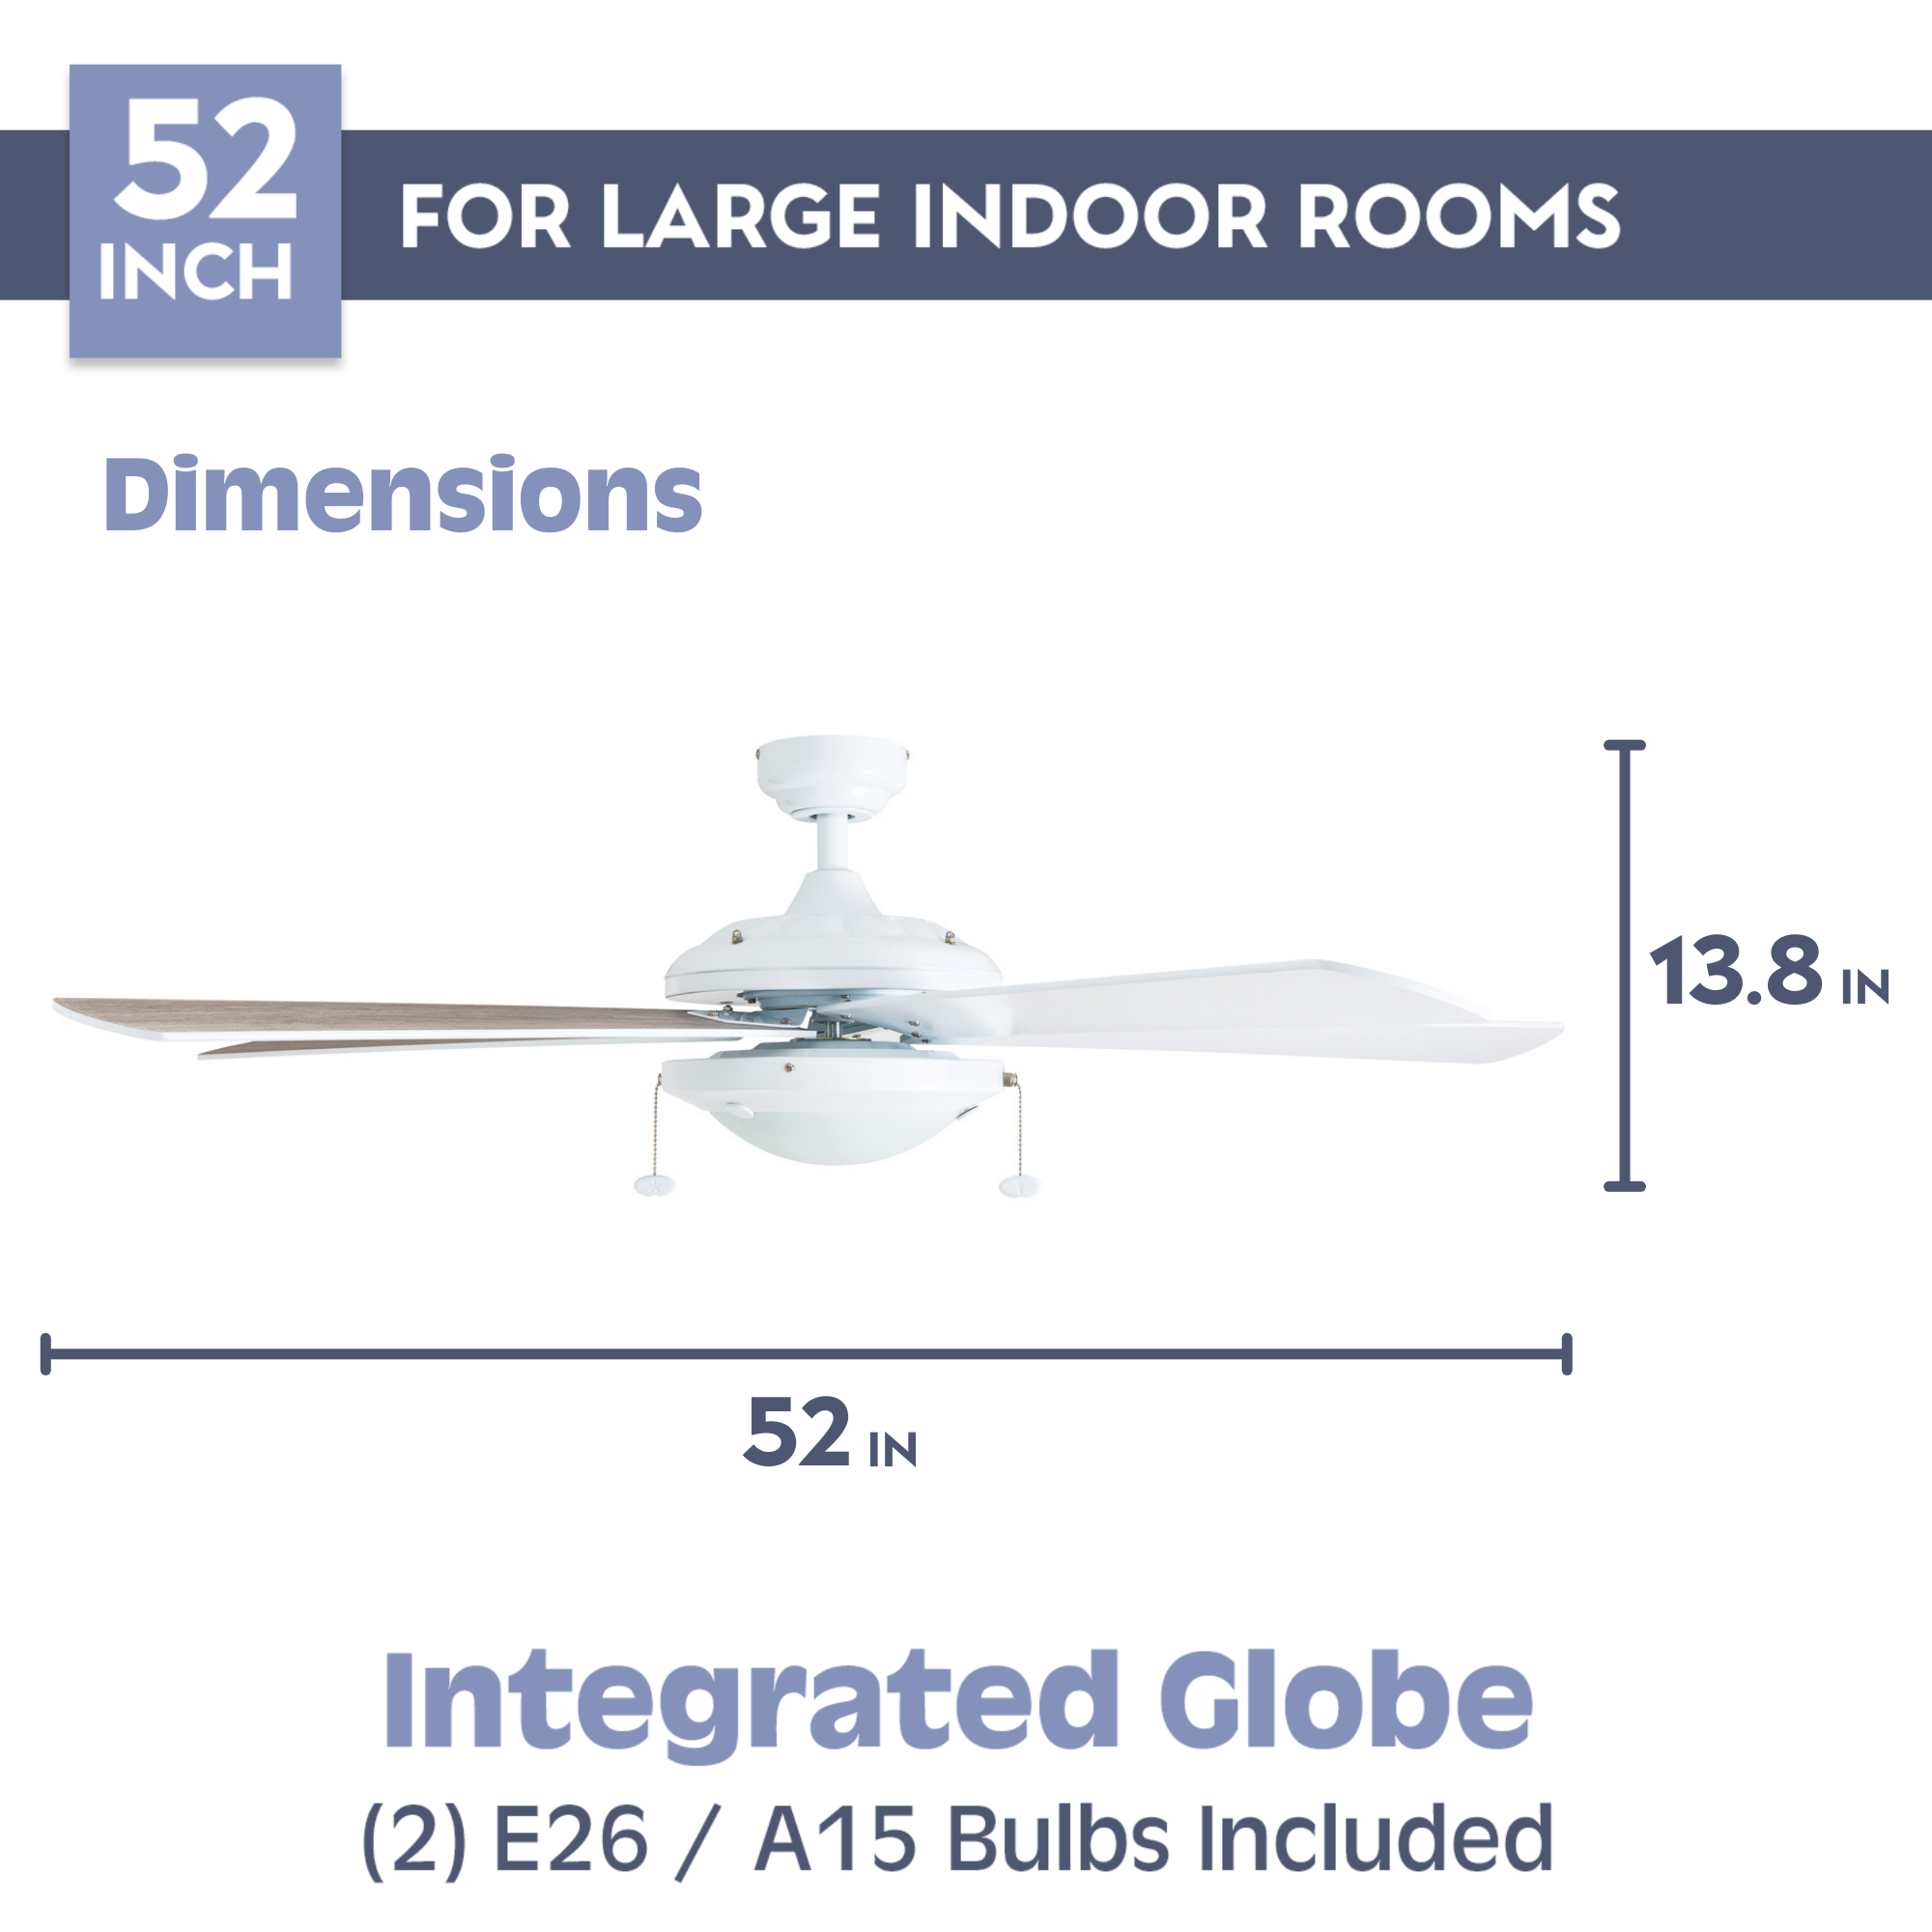 52 Inch Bolivar, White, Pull Chain, Ceiling Fan by Prominence Home